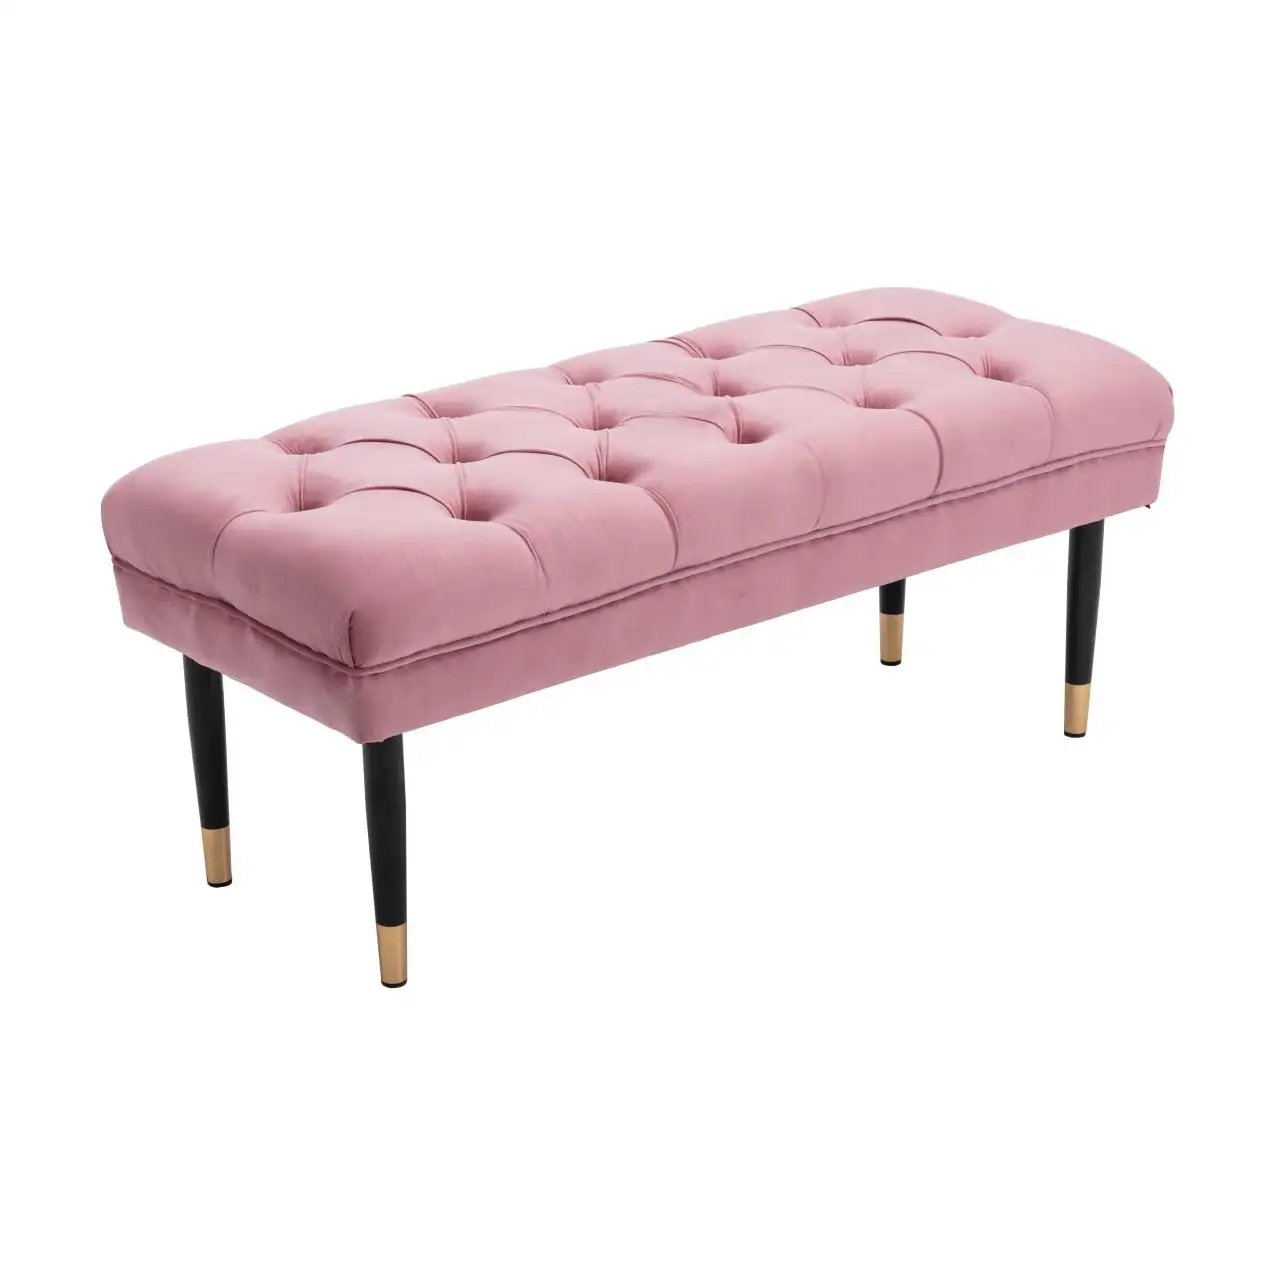 Modern Wholesale Luxury Solid Wood Frame Plush Soft Cushion Bench KD Metal Legs Benches